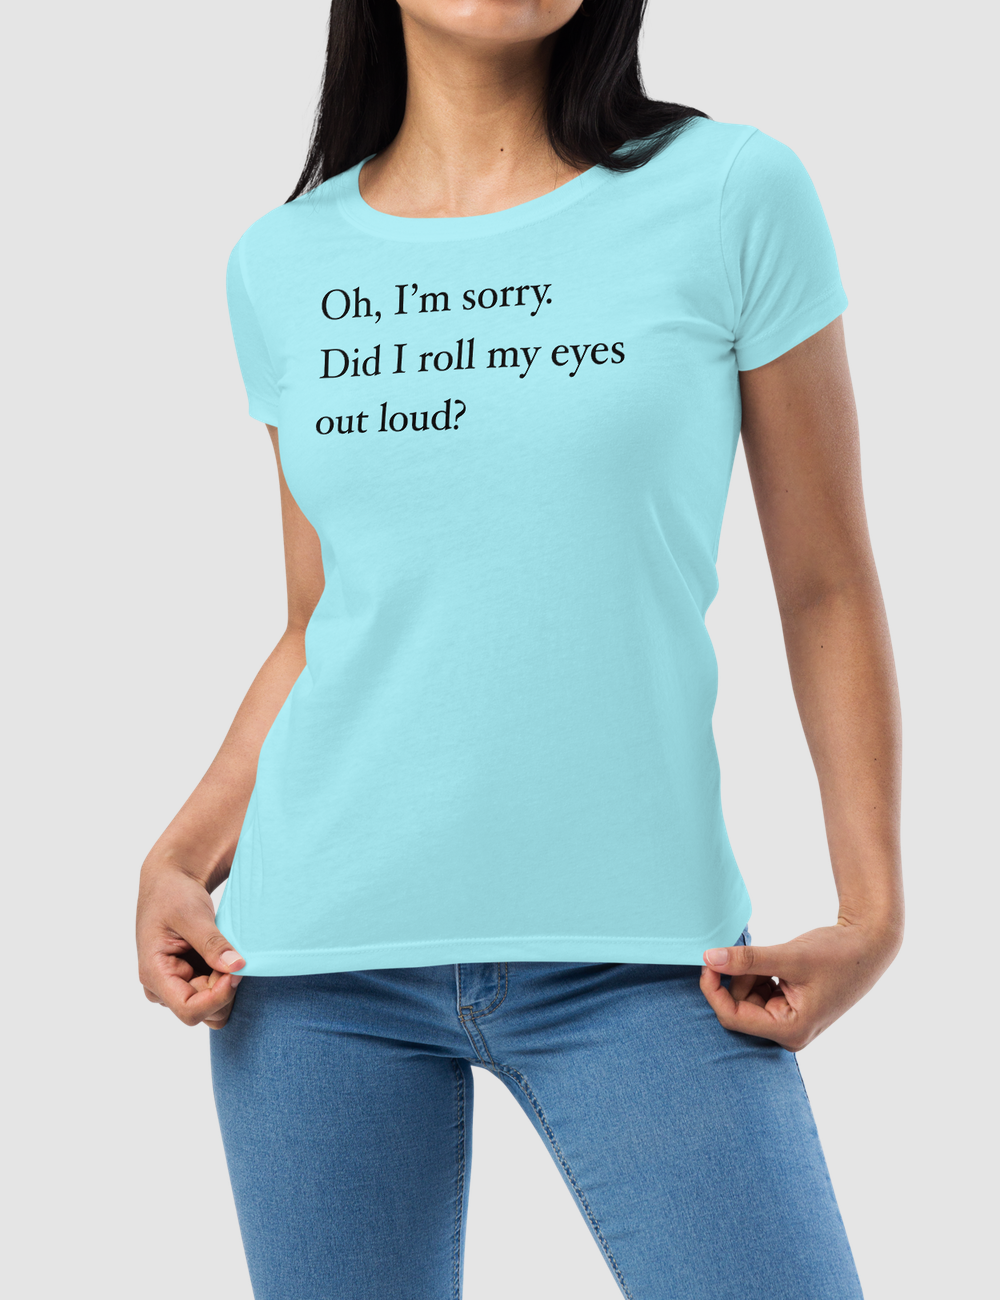 Rolling My Eyes Out Loud | Women's Fitted T-Shirt OniTakai